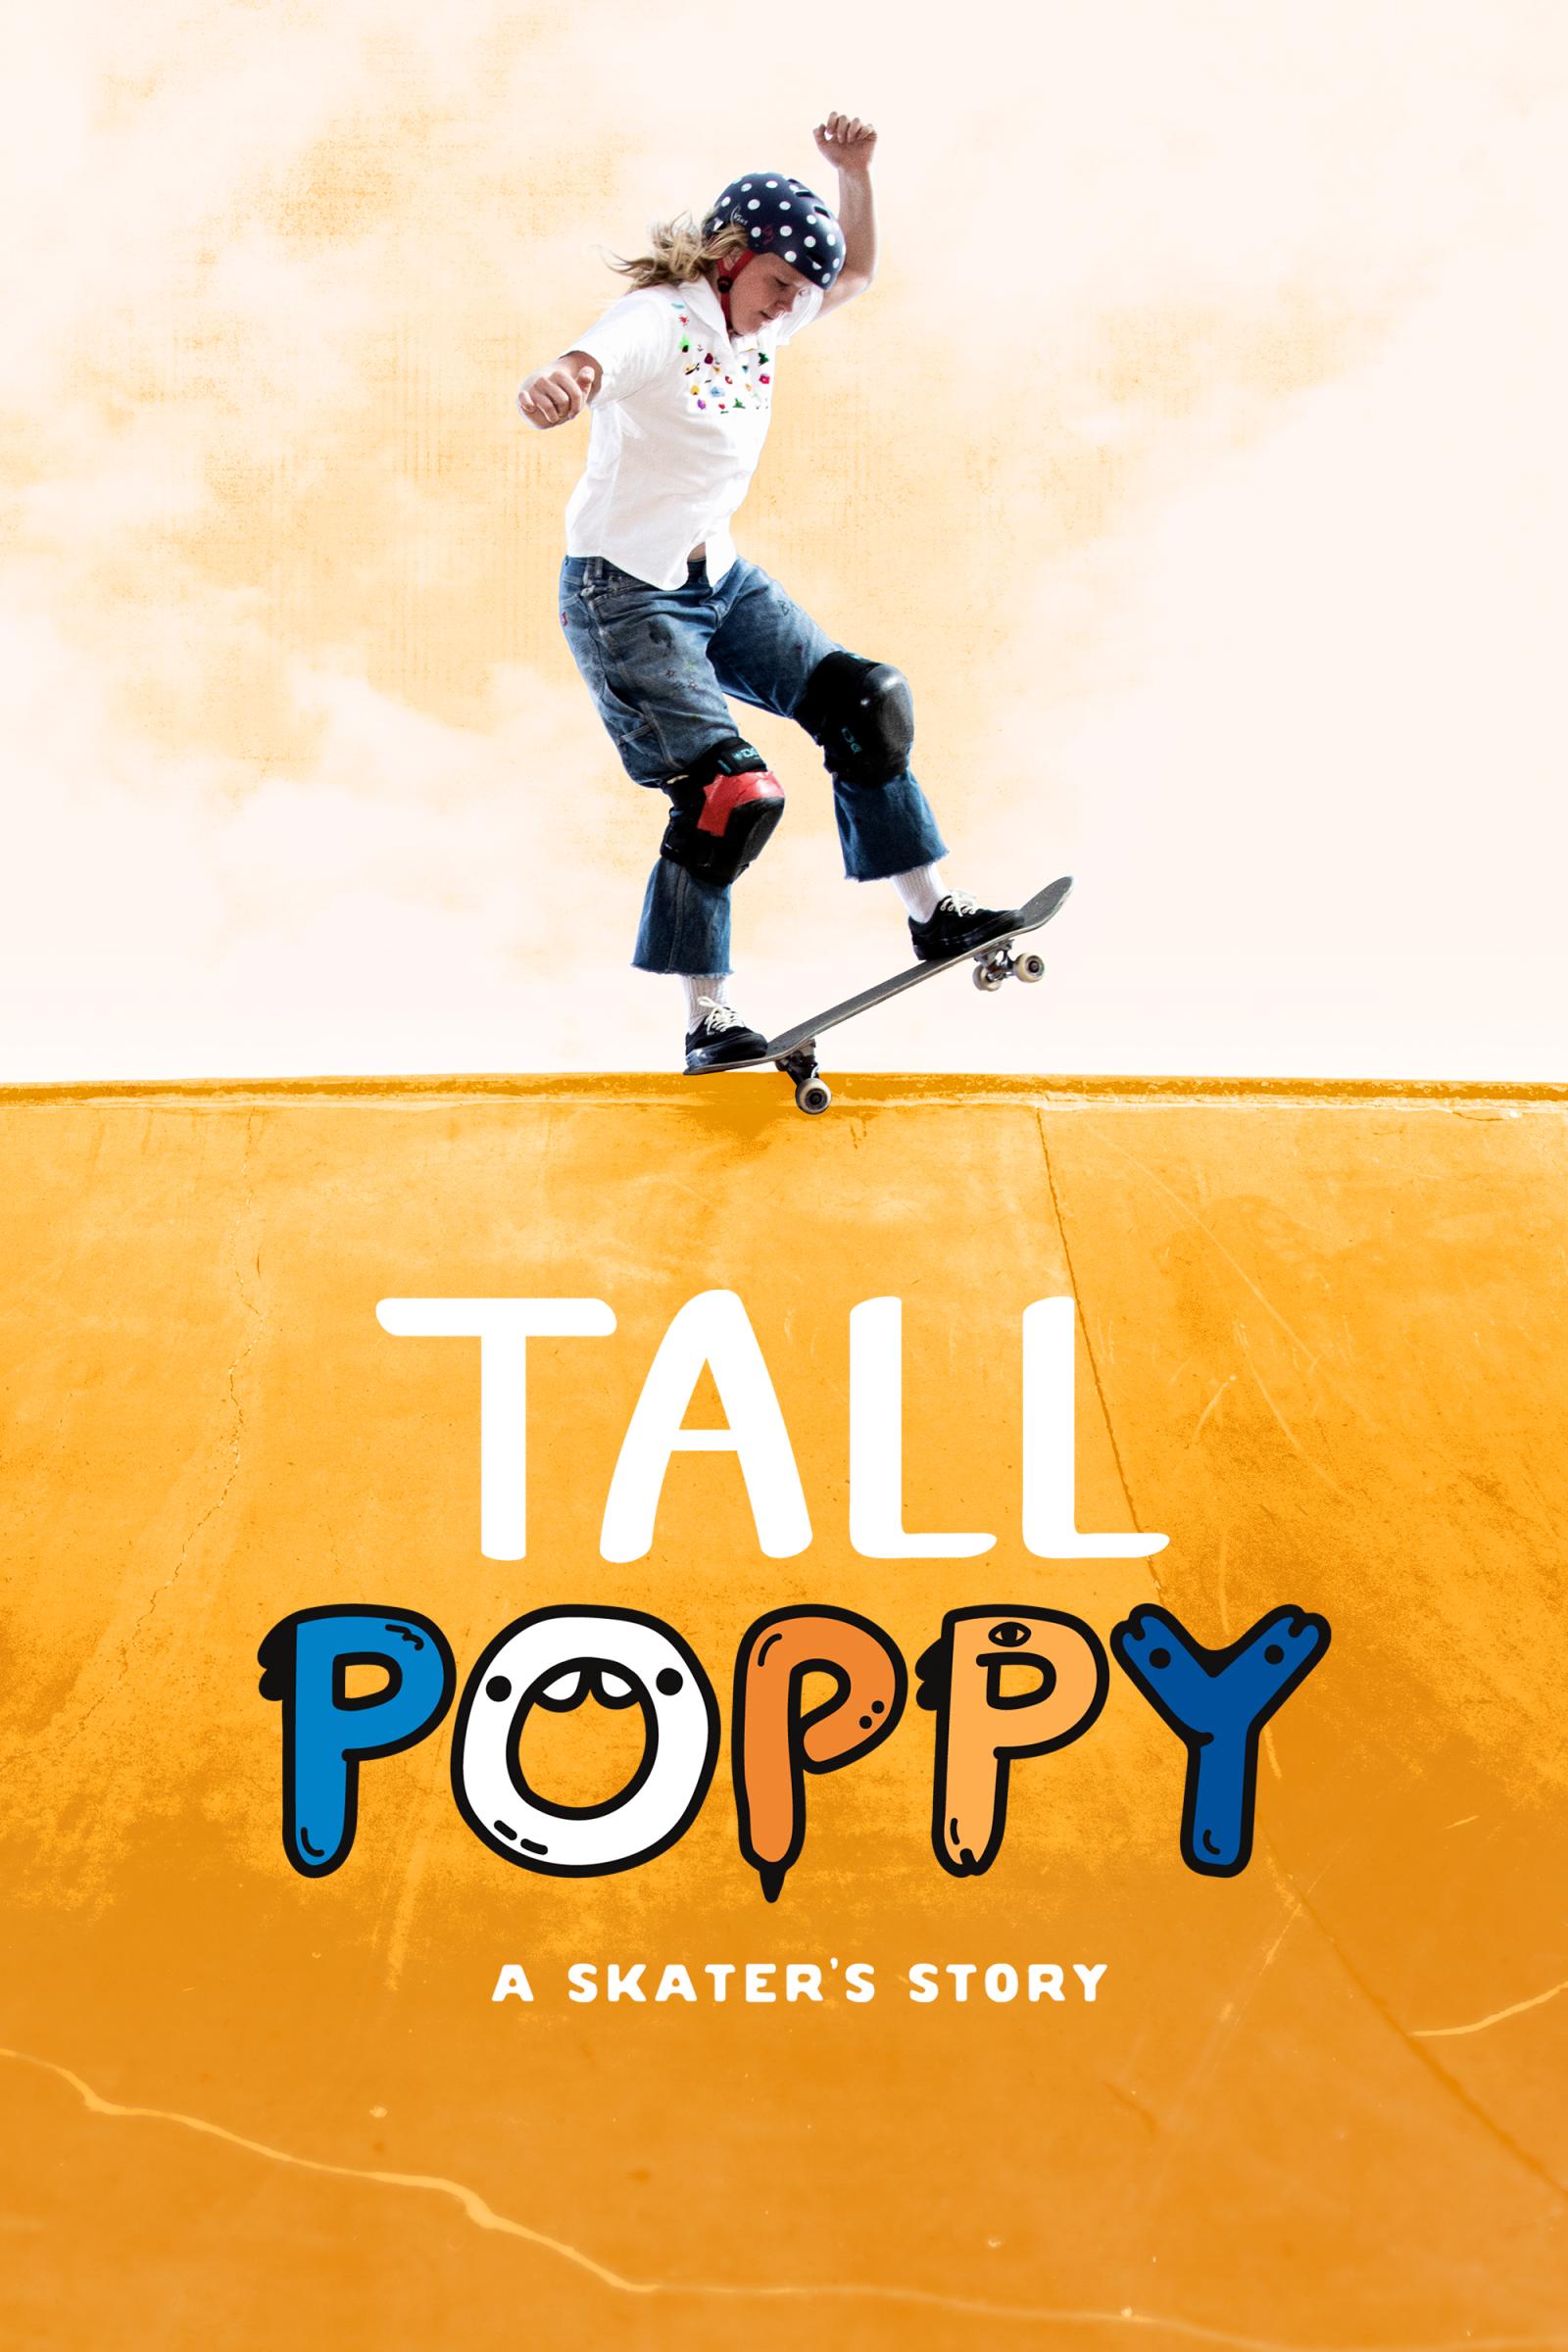 Poppy (2021)  Where to watch streaming and online in Australia